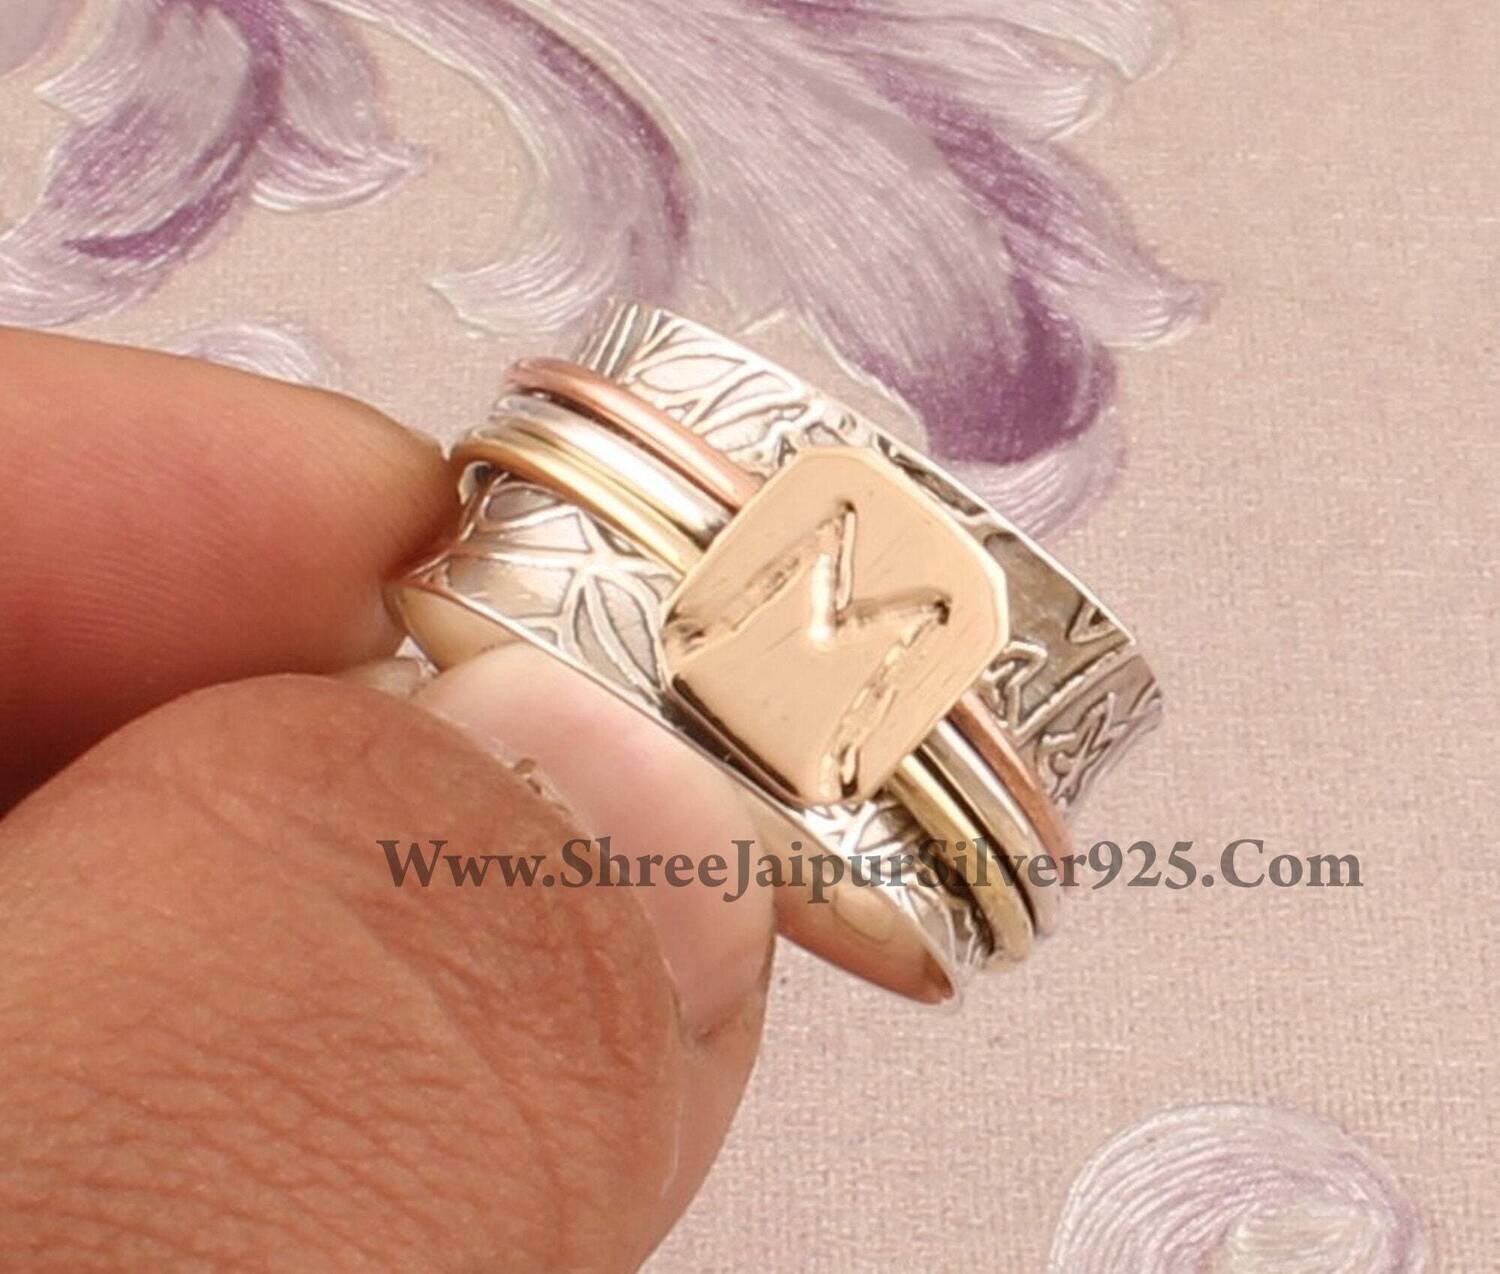 925 Sterling Silver & Brass M Letter Spinner Ring, Handmade Three Tone Designer Carved Band Spinner Ring, Valentine's Day Gift Idea Jewelry